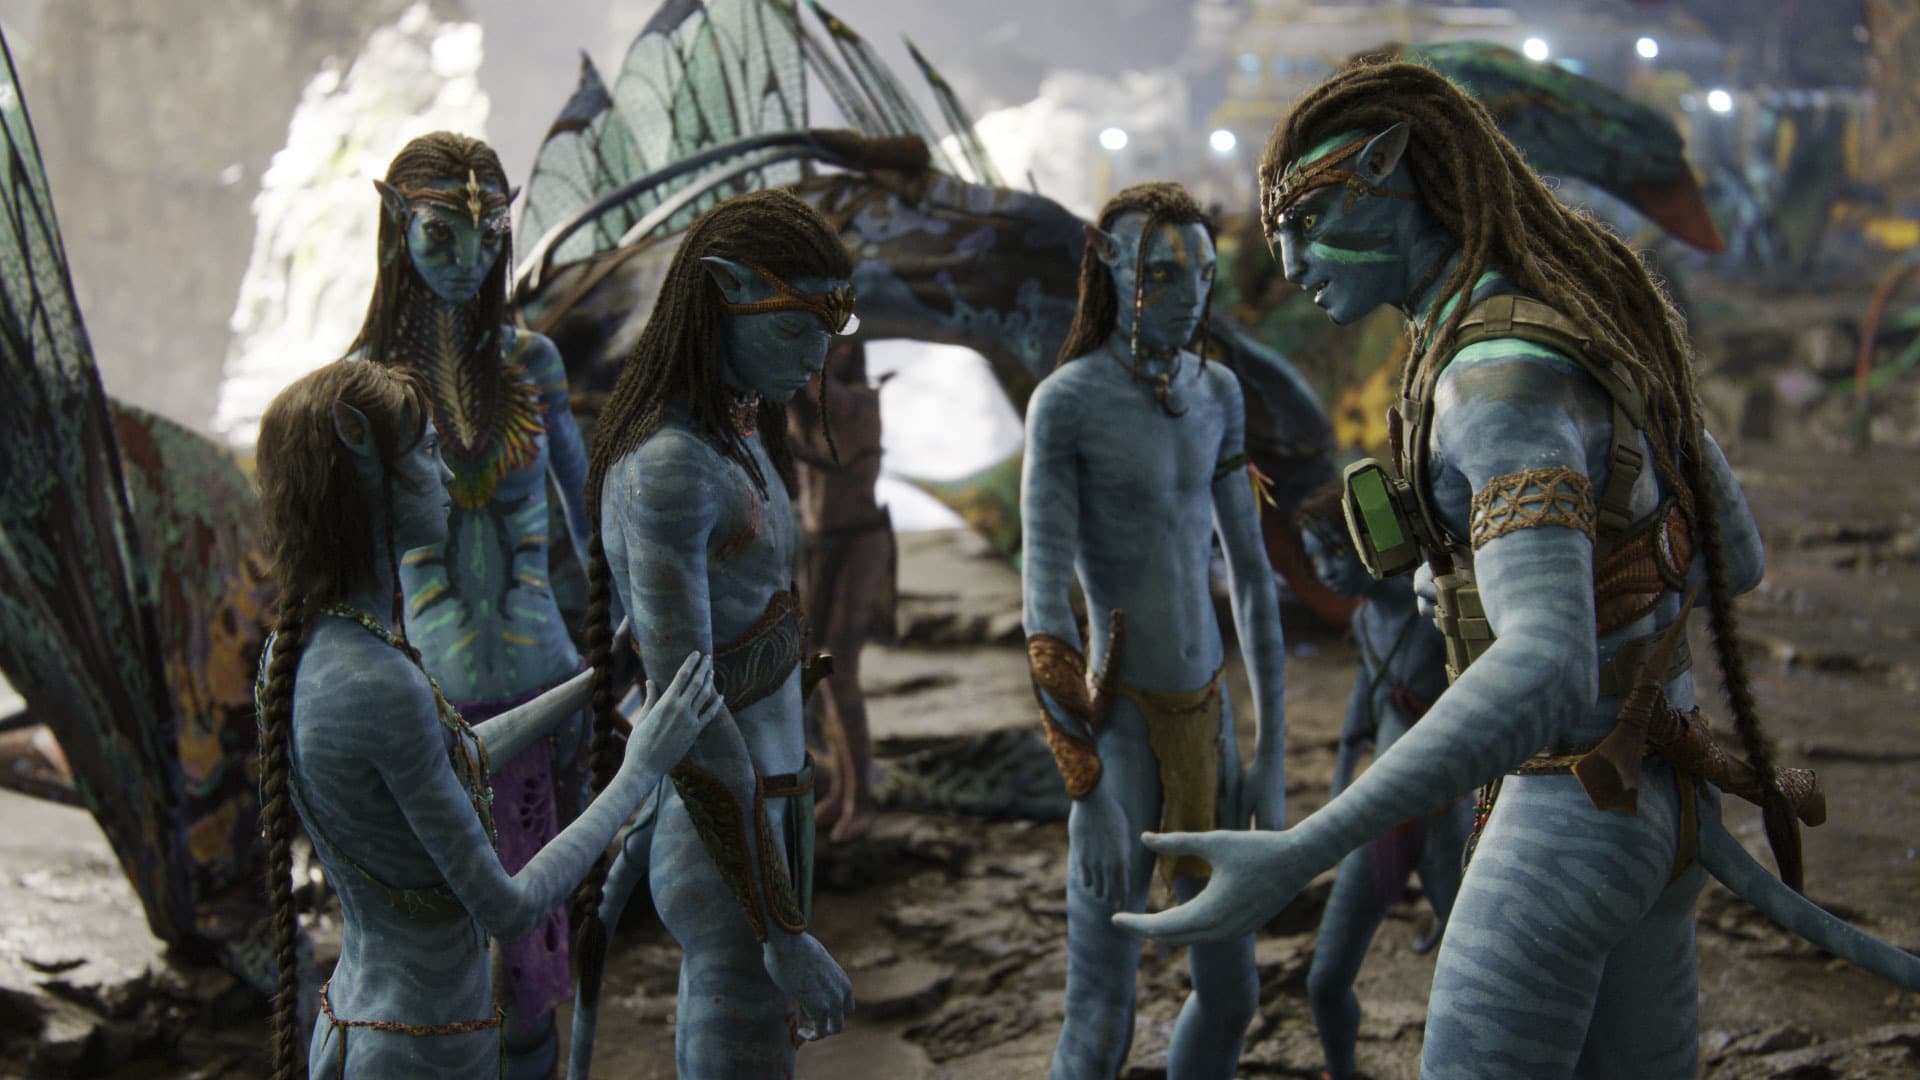 Avatar: The Way of Water' nears $900 million at the global box office